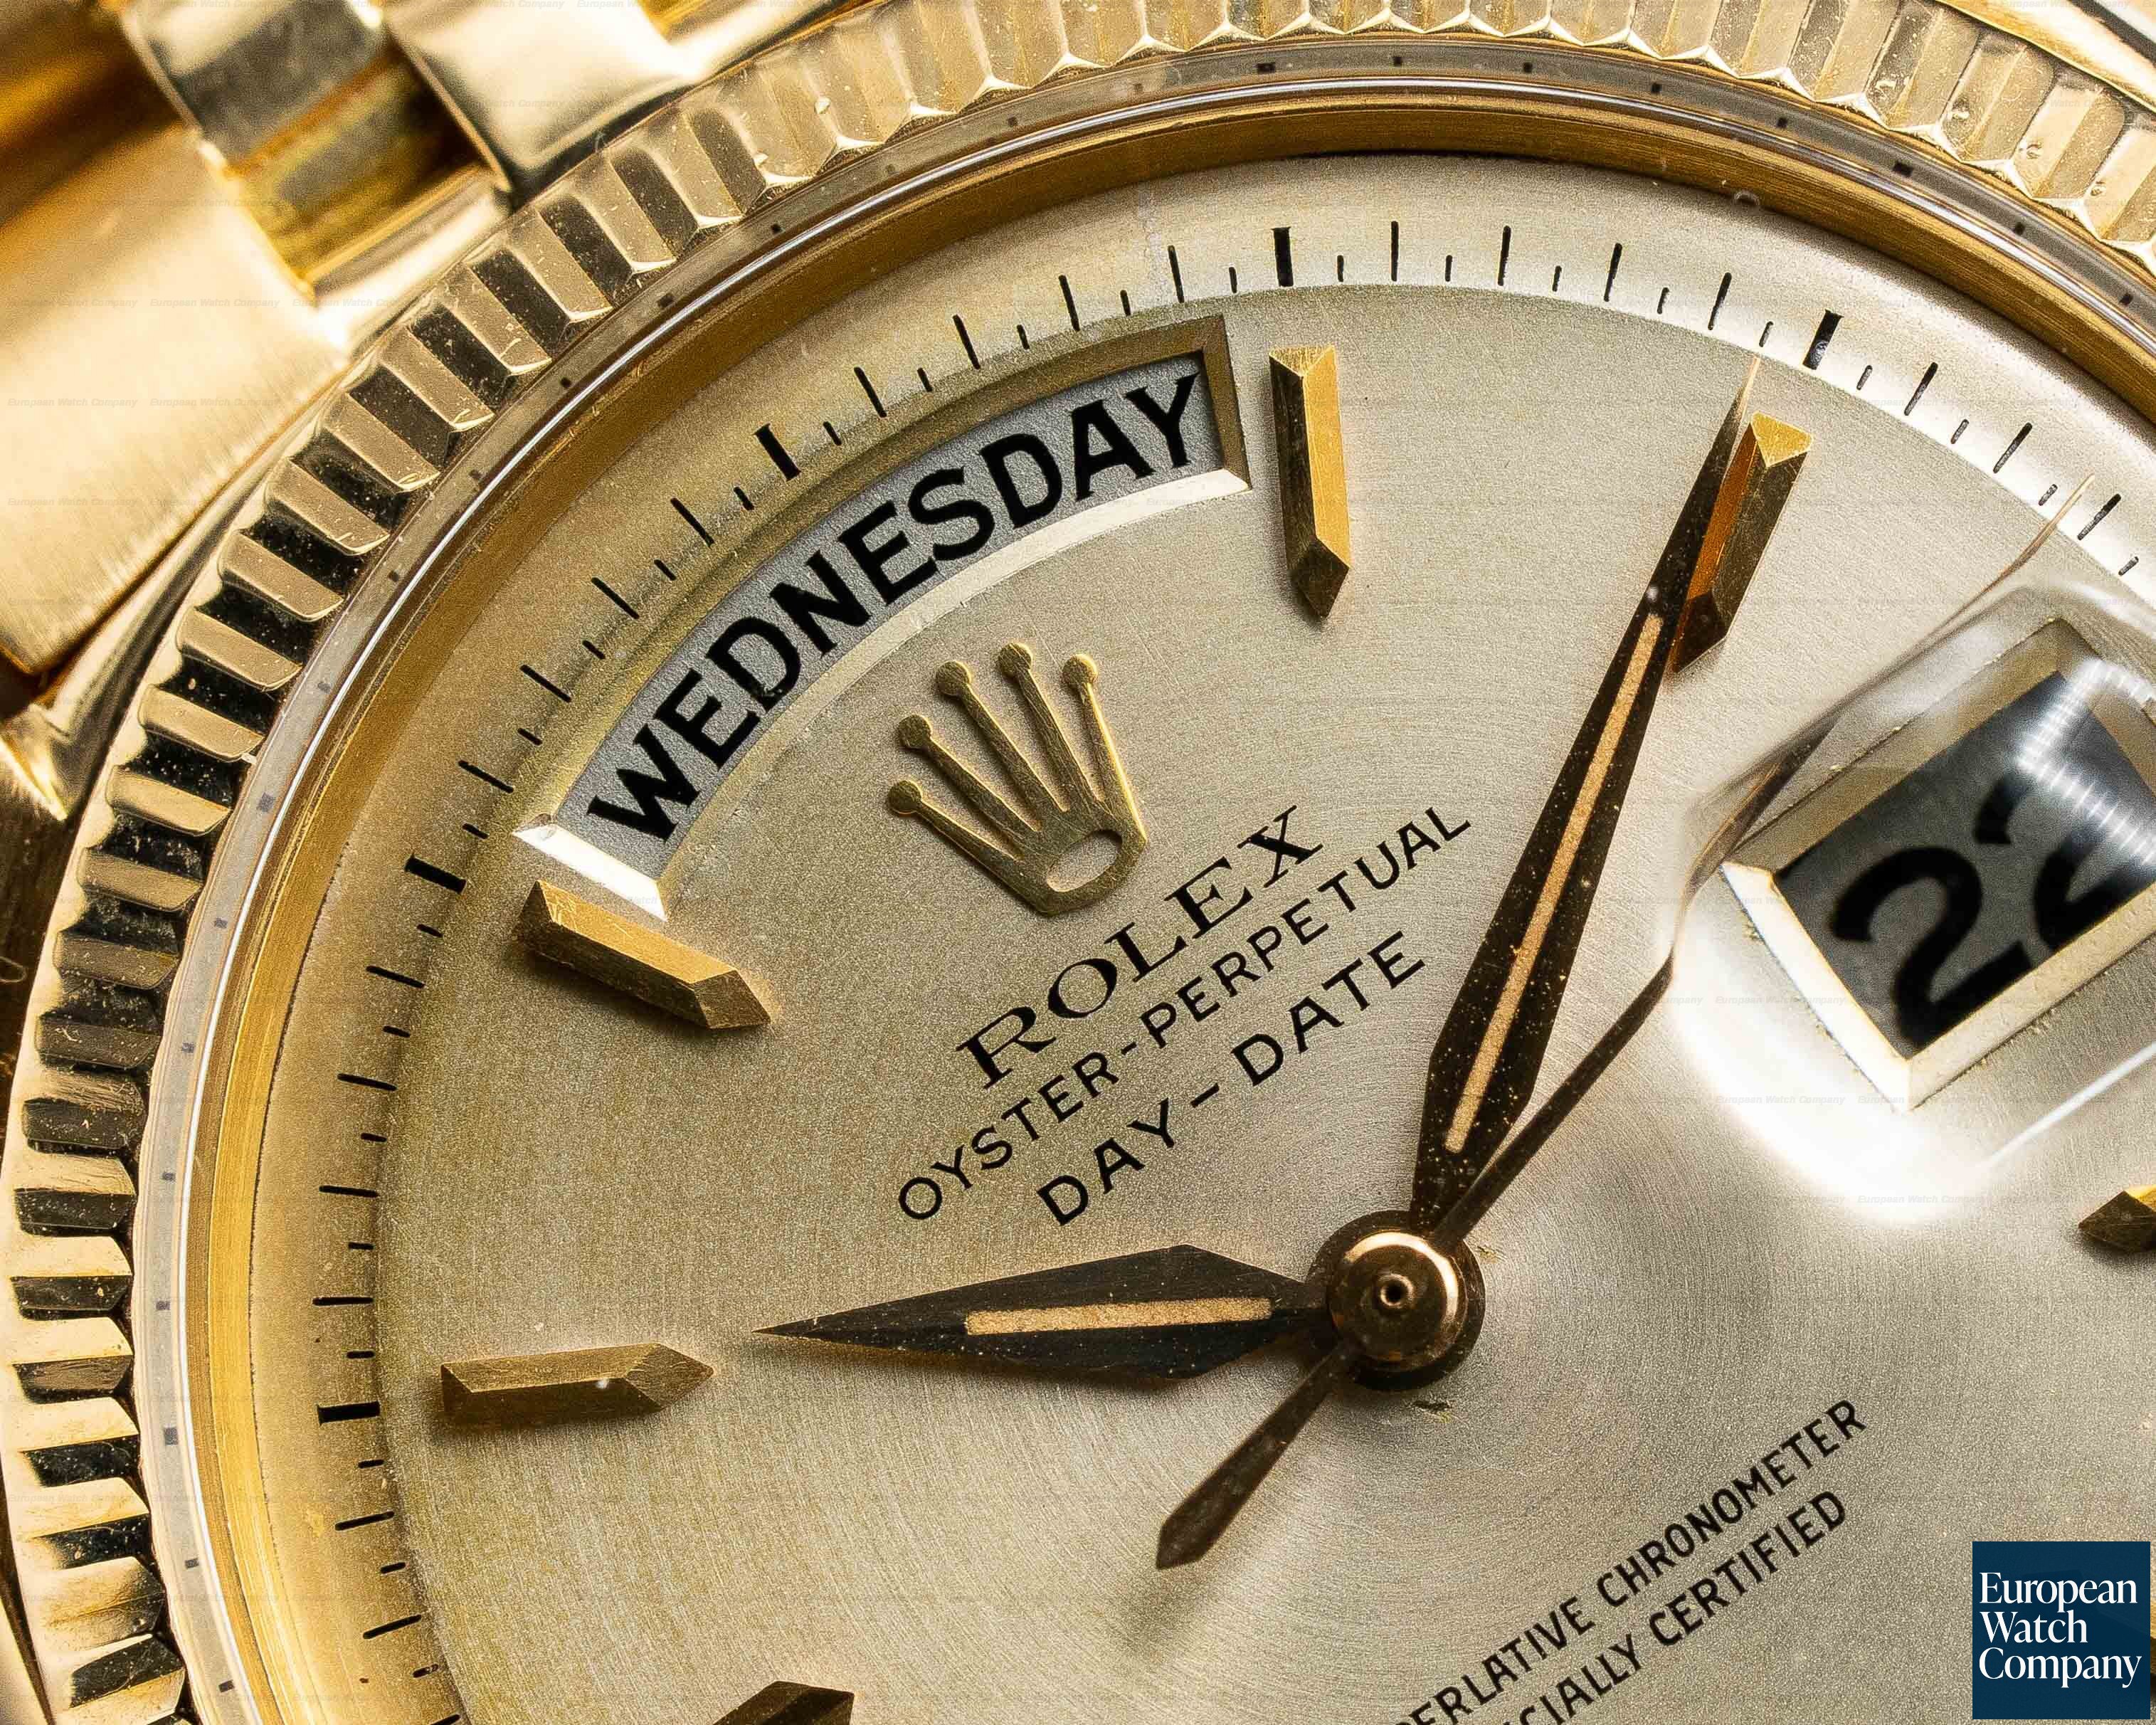 Rolex Oyster Perpetual Day-Date 6611 18K Yellow Gold / Silver Dial c. 1959 Ref. 6611 B